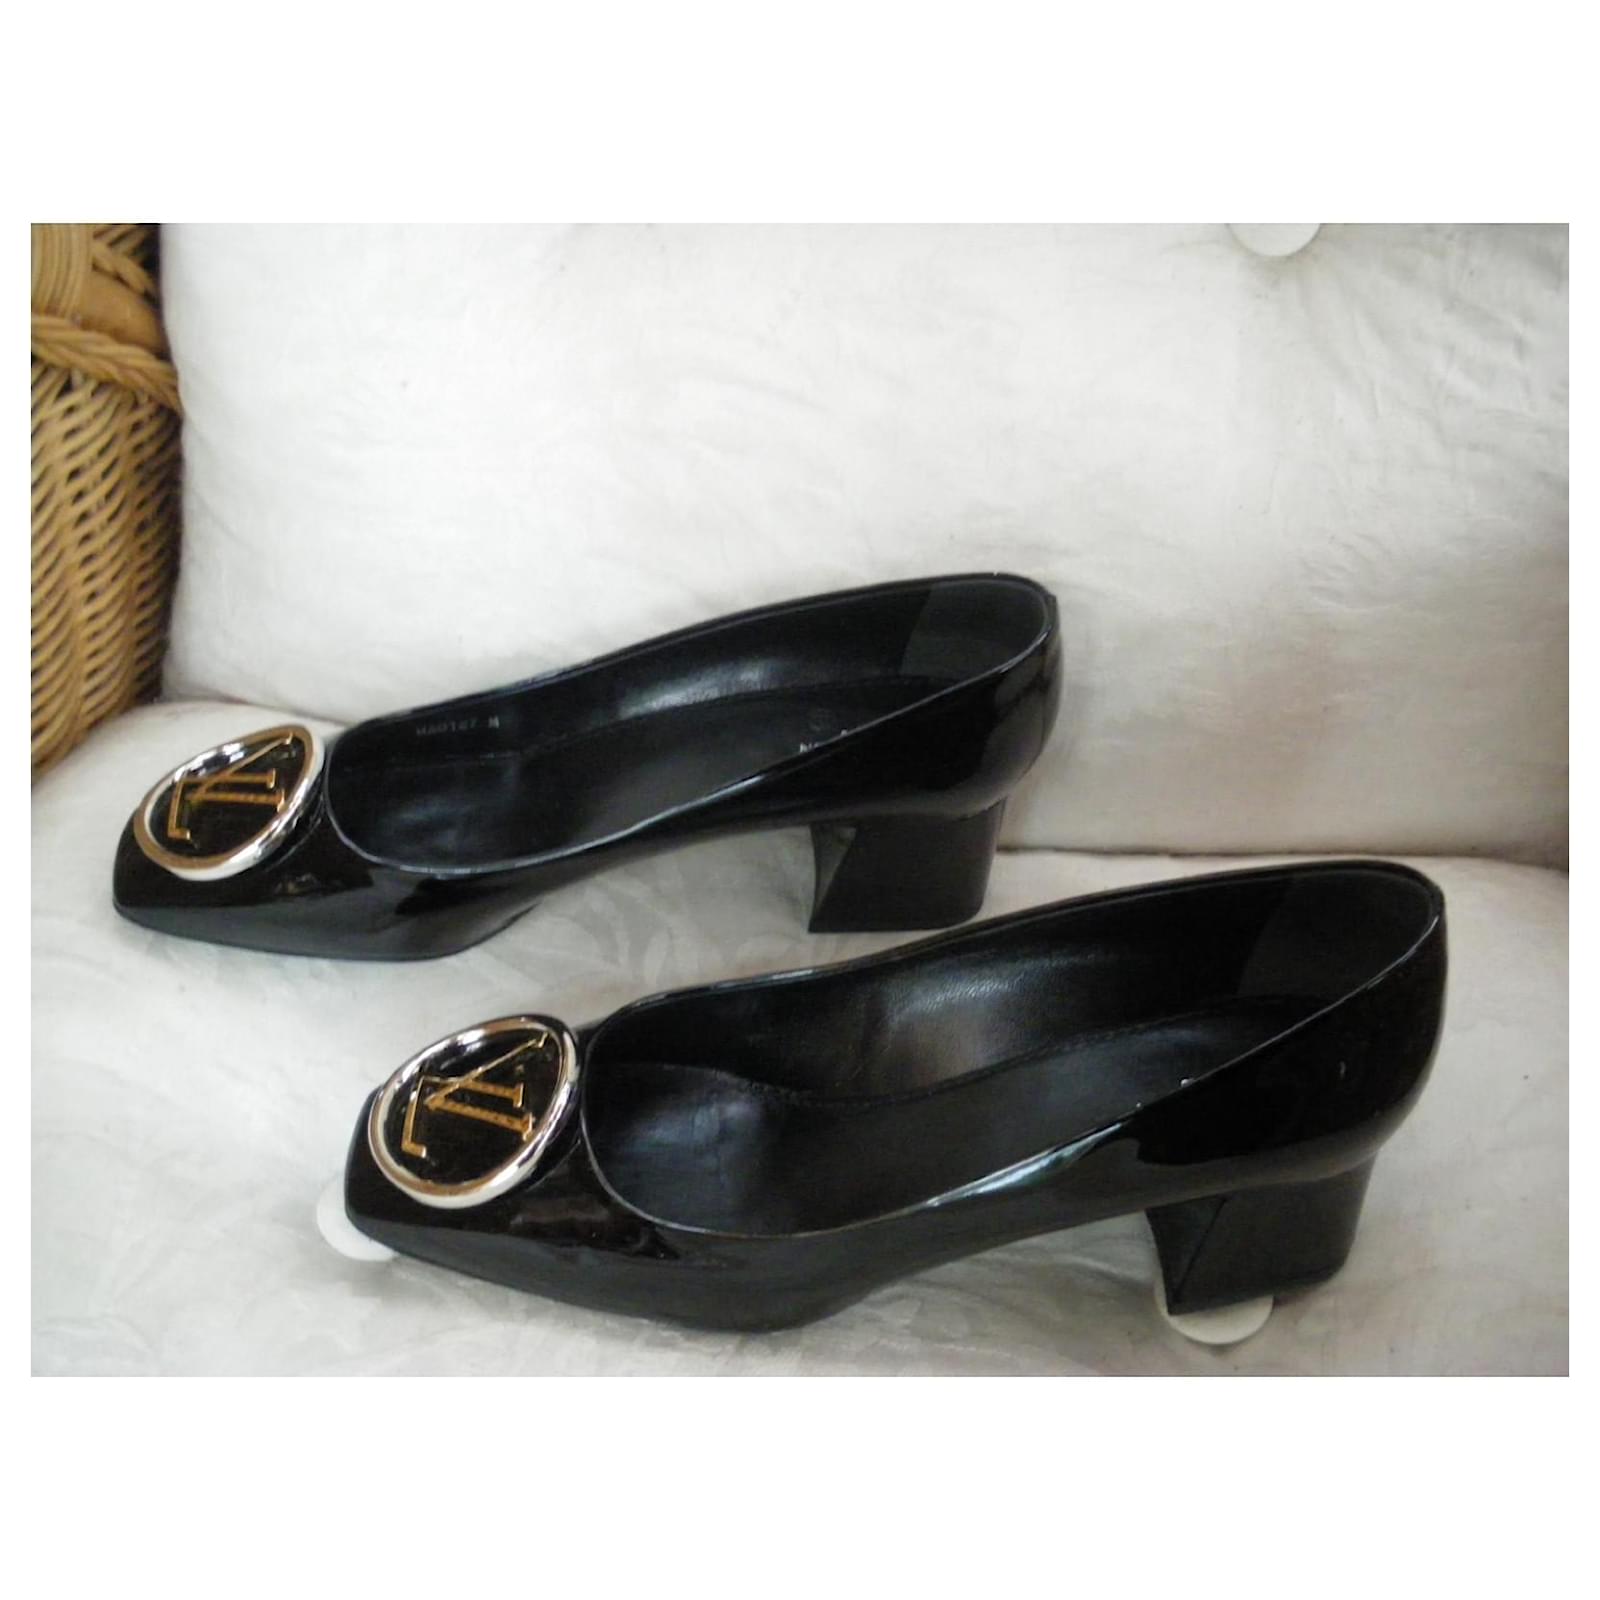 Louis Vuitton - Authenticated Heel - Patent Leather Black for Women, Very Good Condition